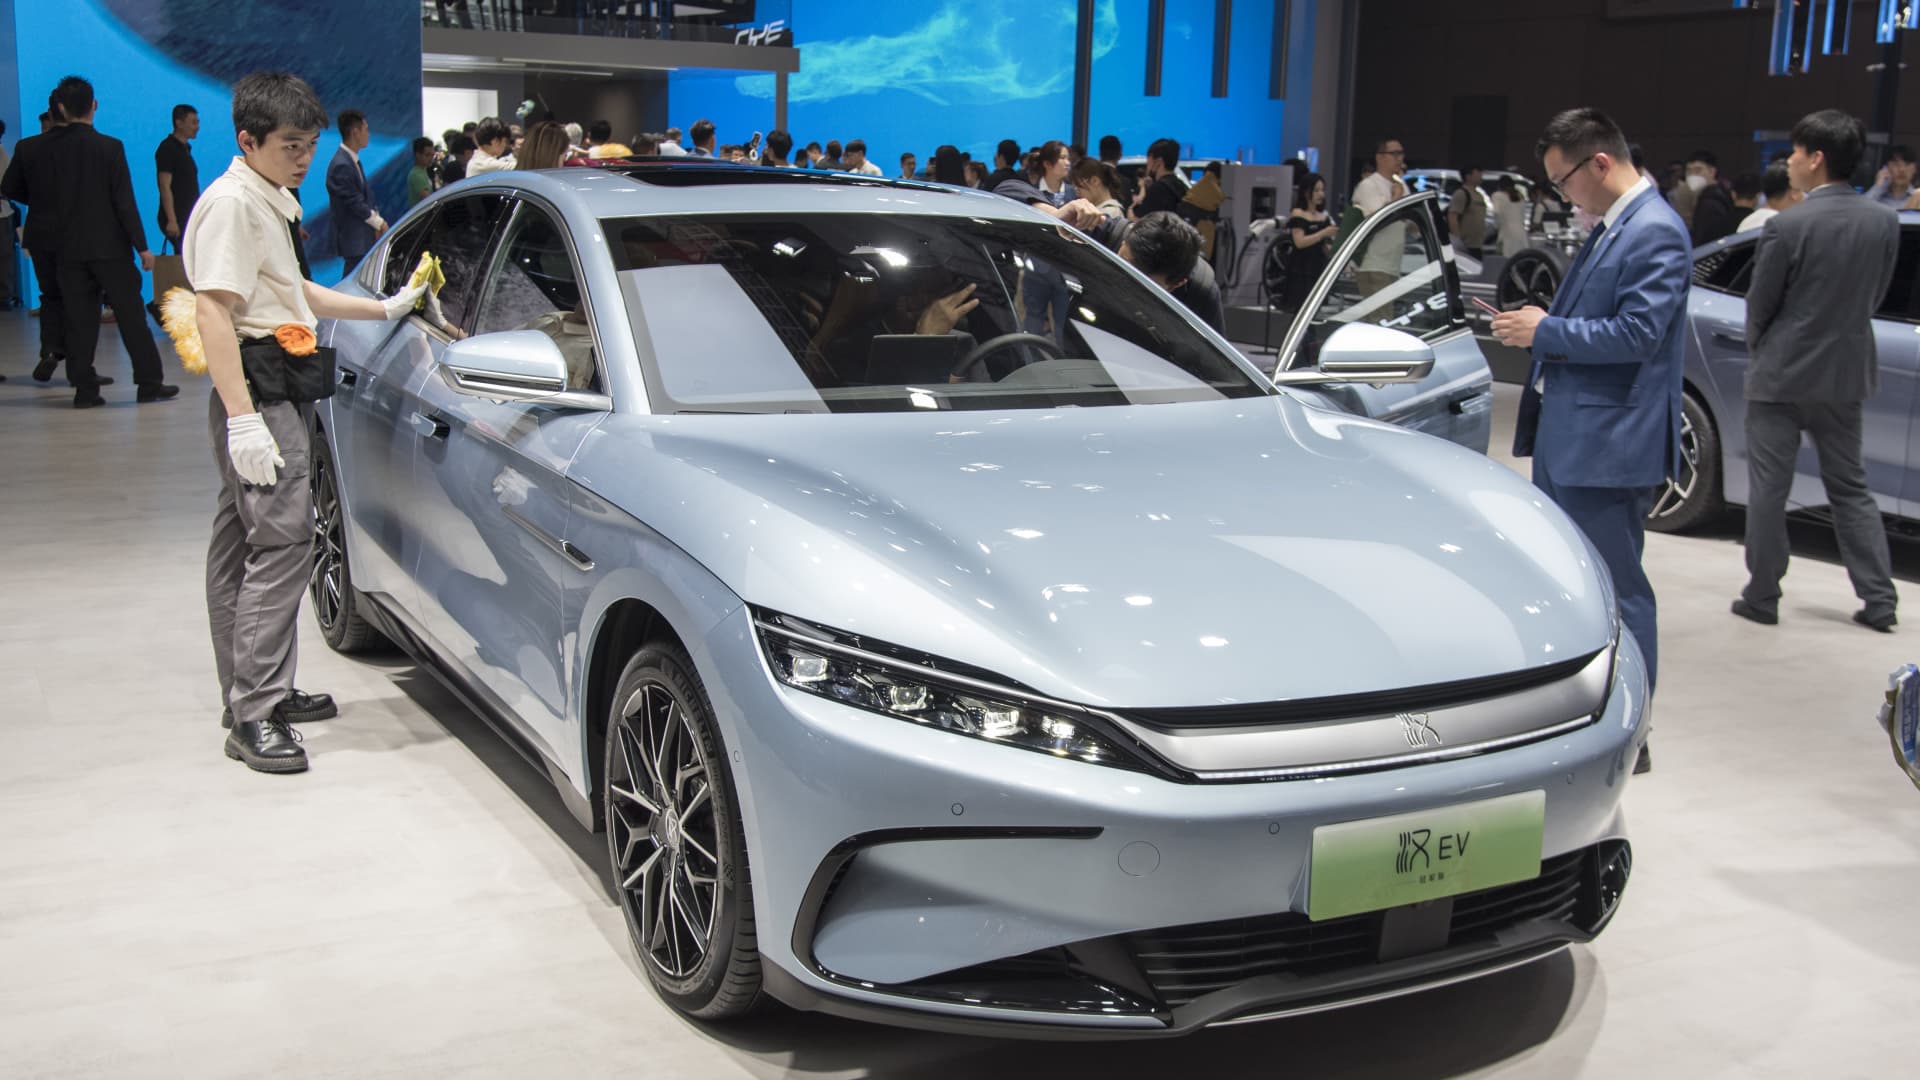  BYD Han EV sedan is on display during the Shanghai International Automobile Industry Exhibition on April 18, 2023 in Shanghai, China.